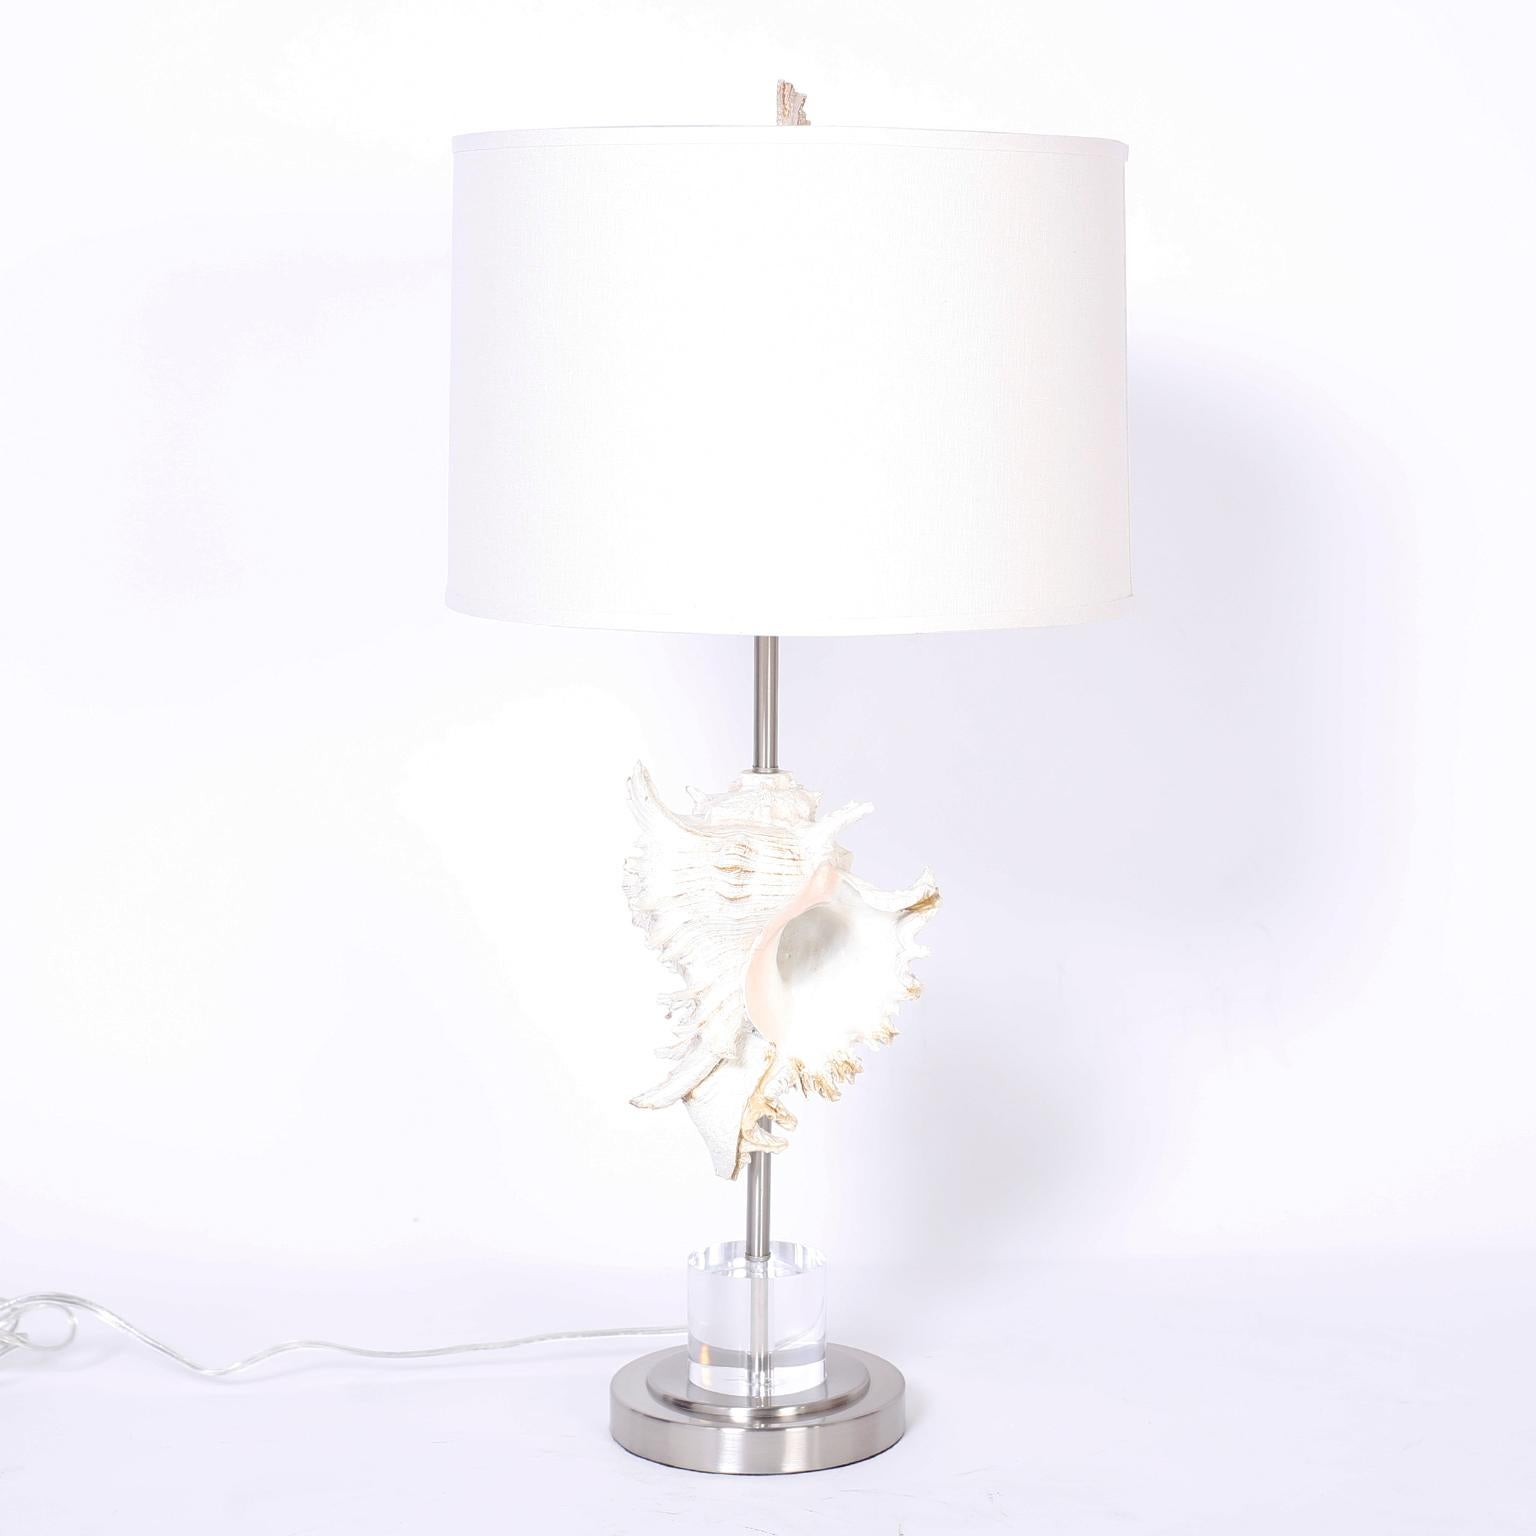 Pair of table lamps with composite murex shell mounted on metal rods over a Lucite stand on a metal base.